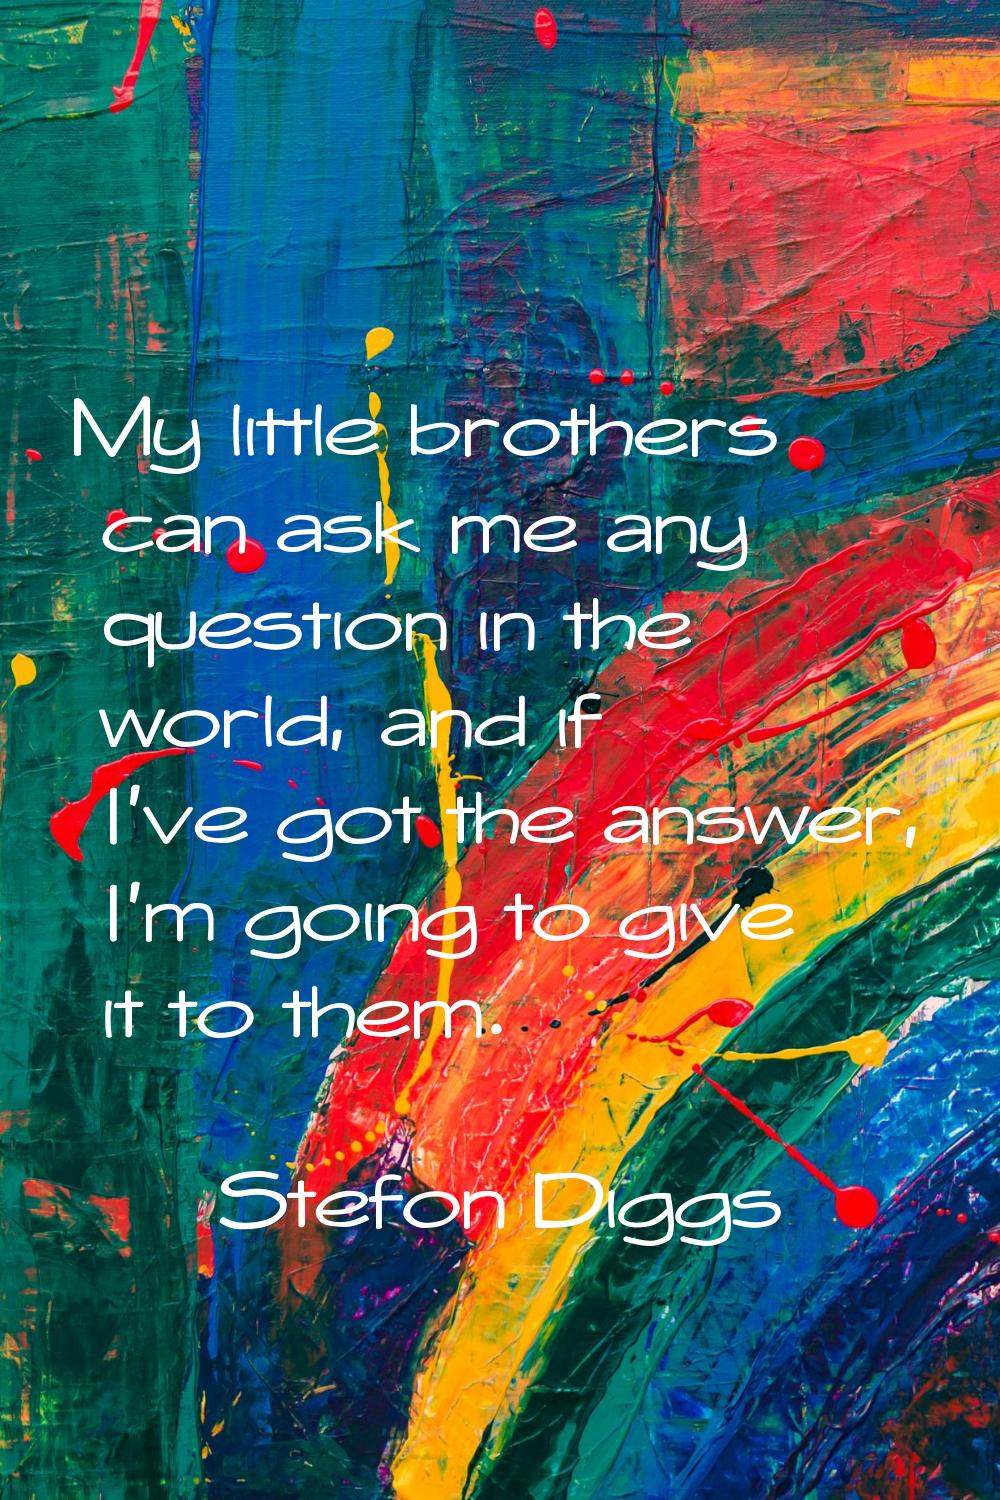 My little brothers can ask me any question in the world, and if I've got the answer, I'm going to g